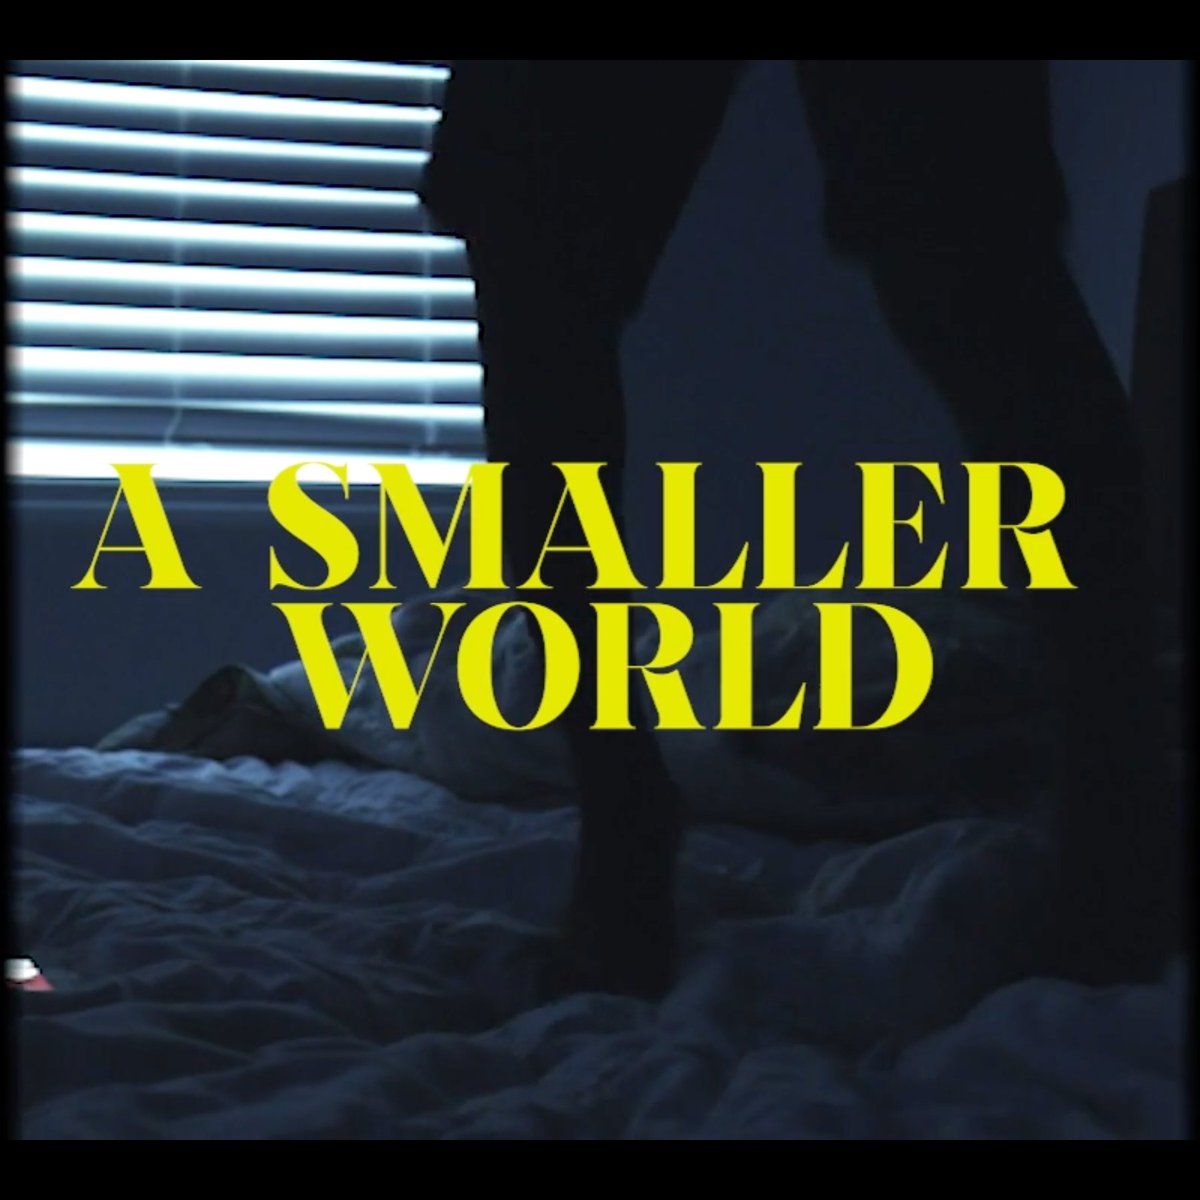 Xan Black ( @madebyxan) is a 20 yo non-binary graphic designer and filmmaker based in Brooklyn. Their first film, A Smaller World, inspired by Charles Burnett's, depicts a young boy‘s perspective amidst a global pandemic.you can view their work here :  https://www.madebyxan.com/ 